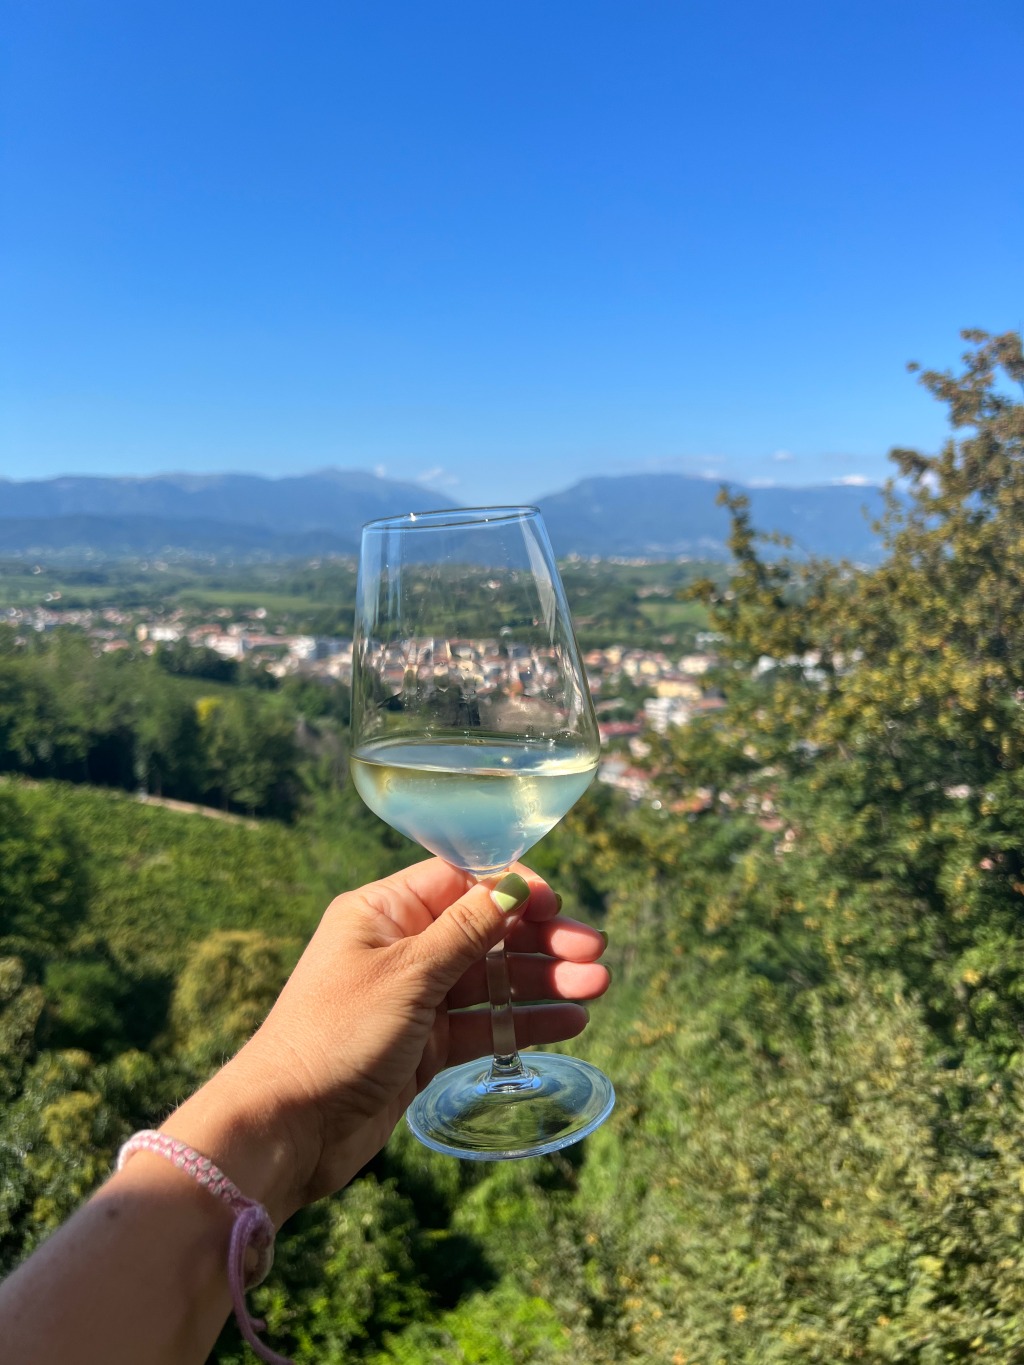 The Best way to experience Italy’s Prosecco Hills